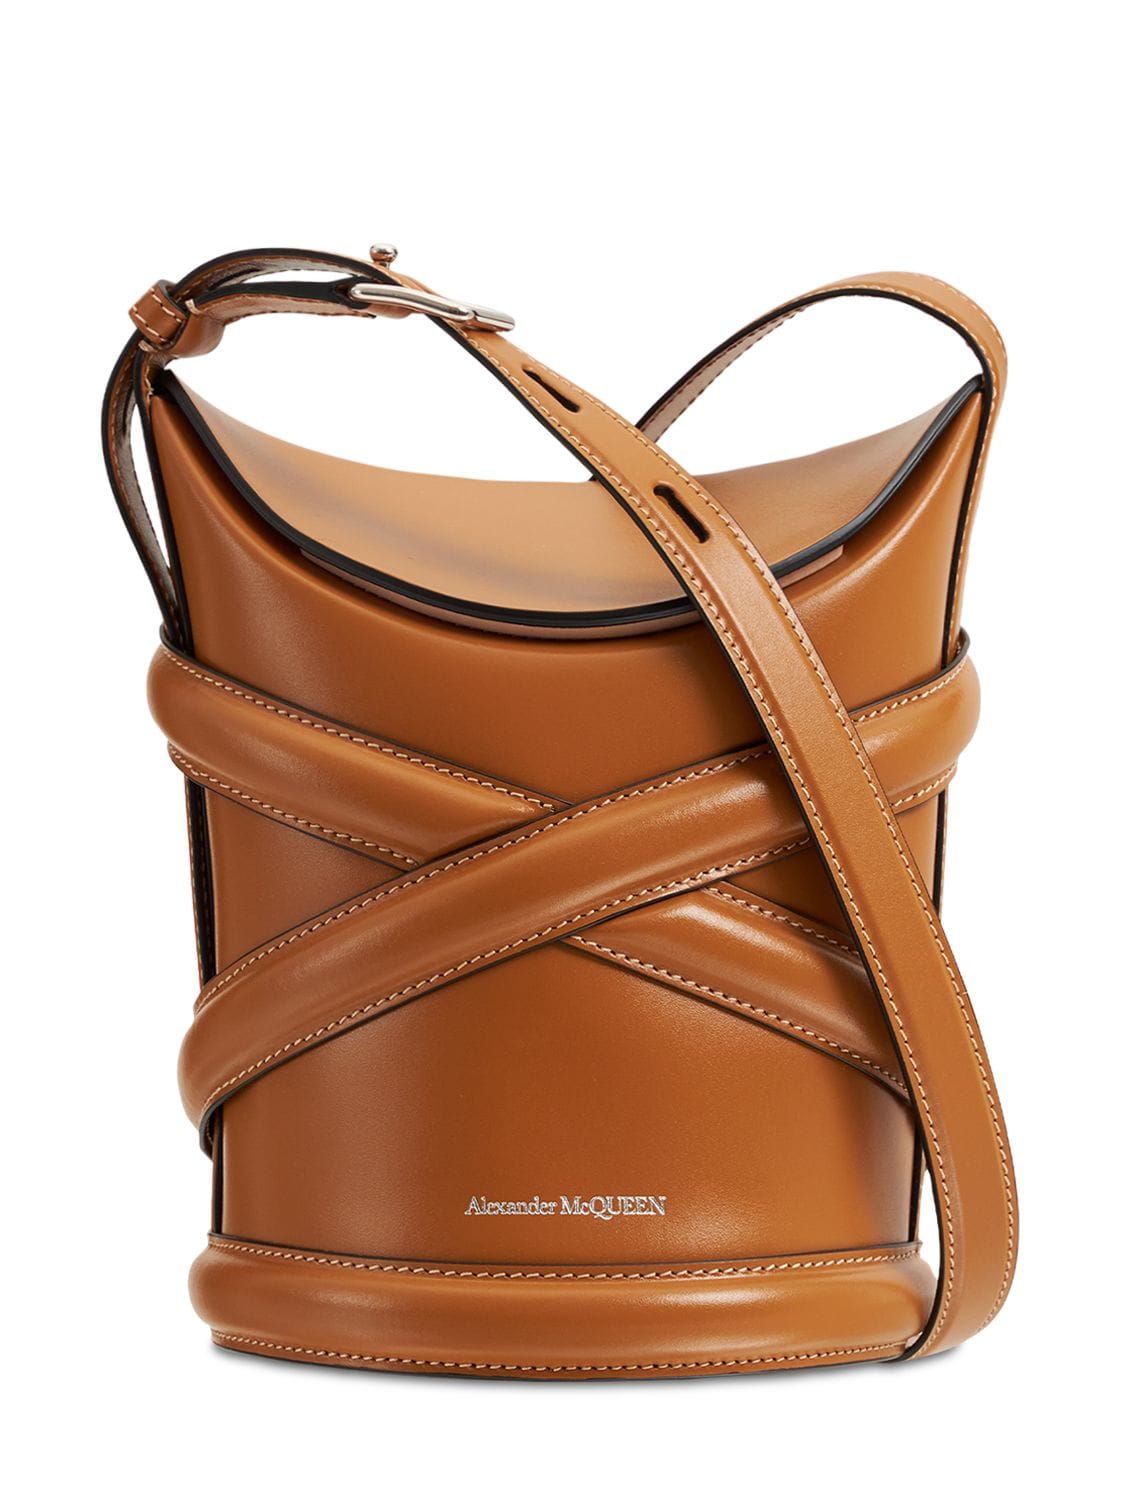 Alexander Mcqueen The Curve Small Leather Shoulder Bag In Загар